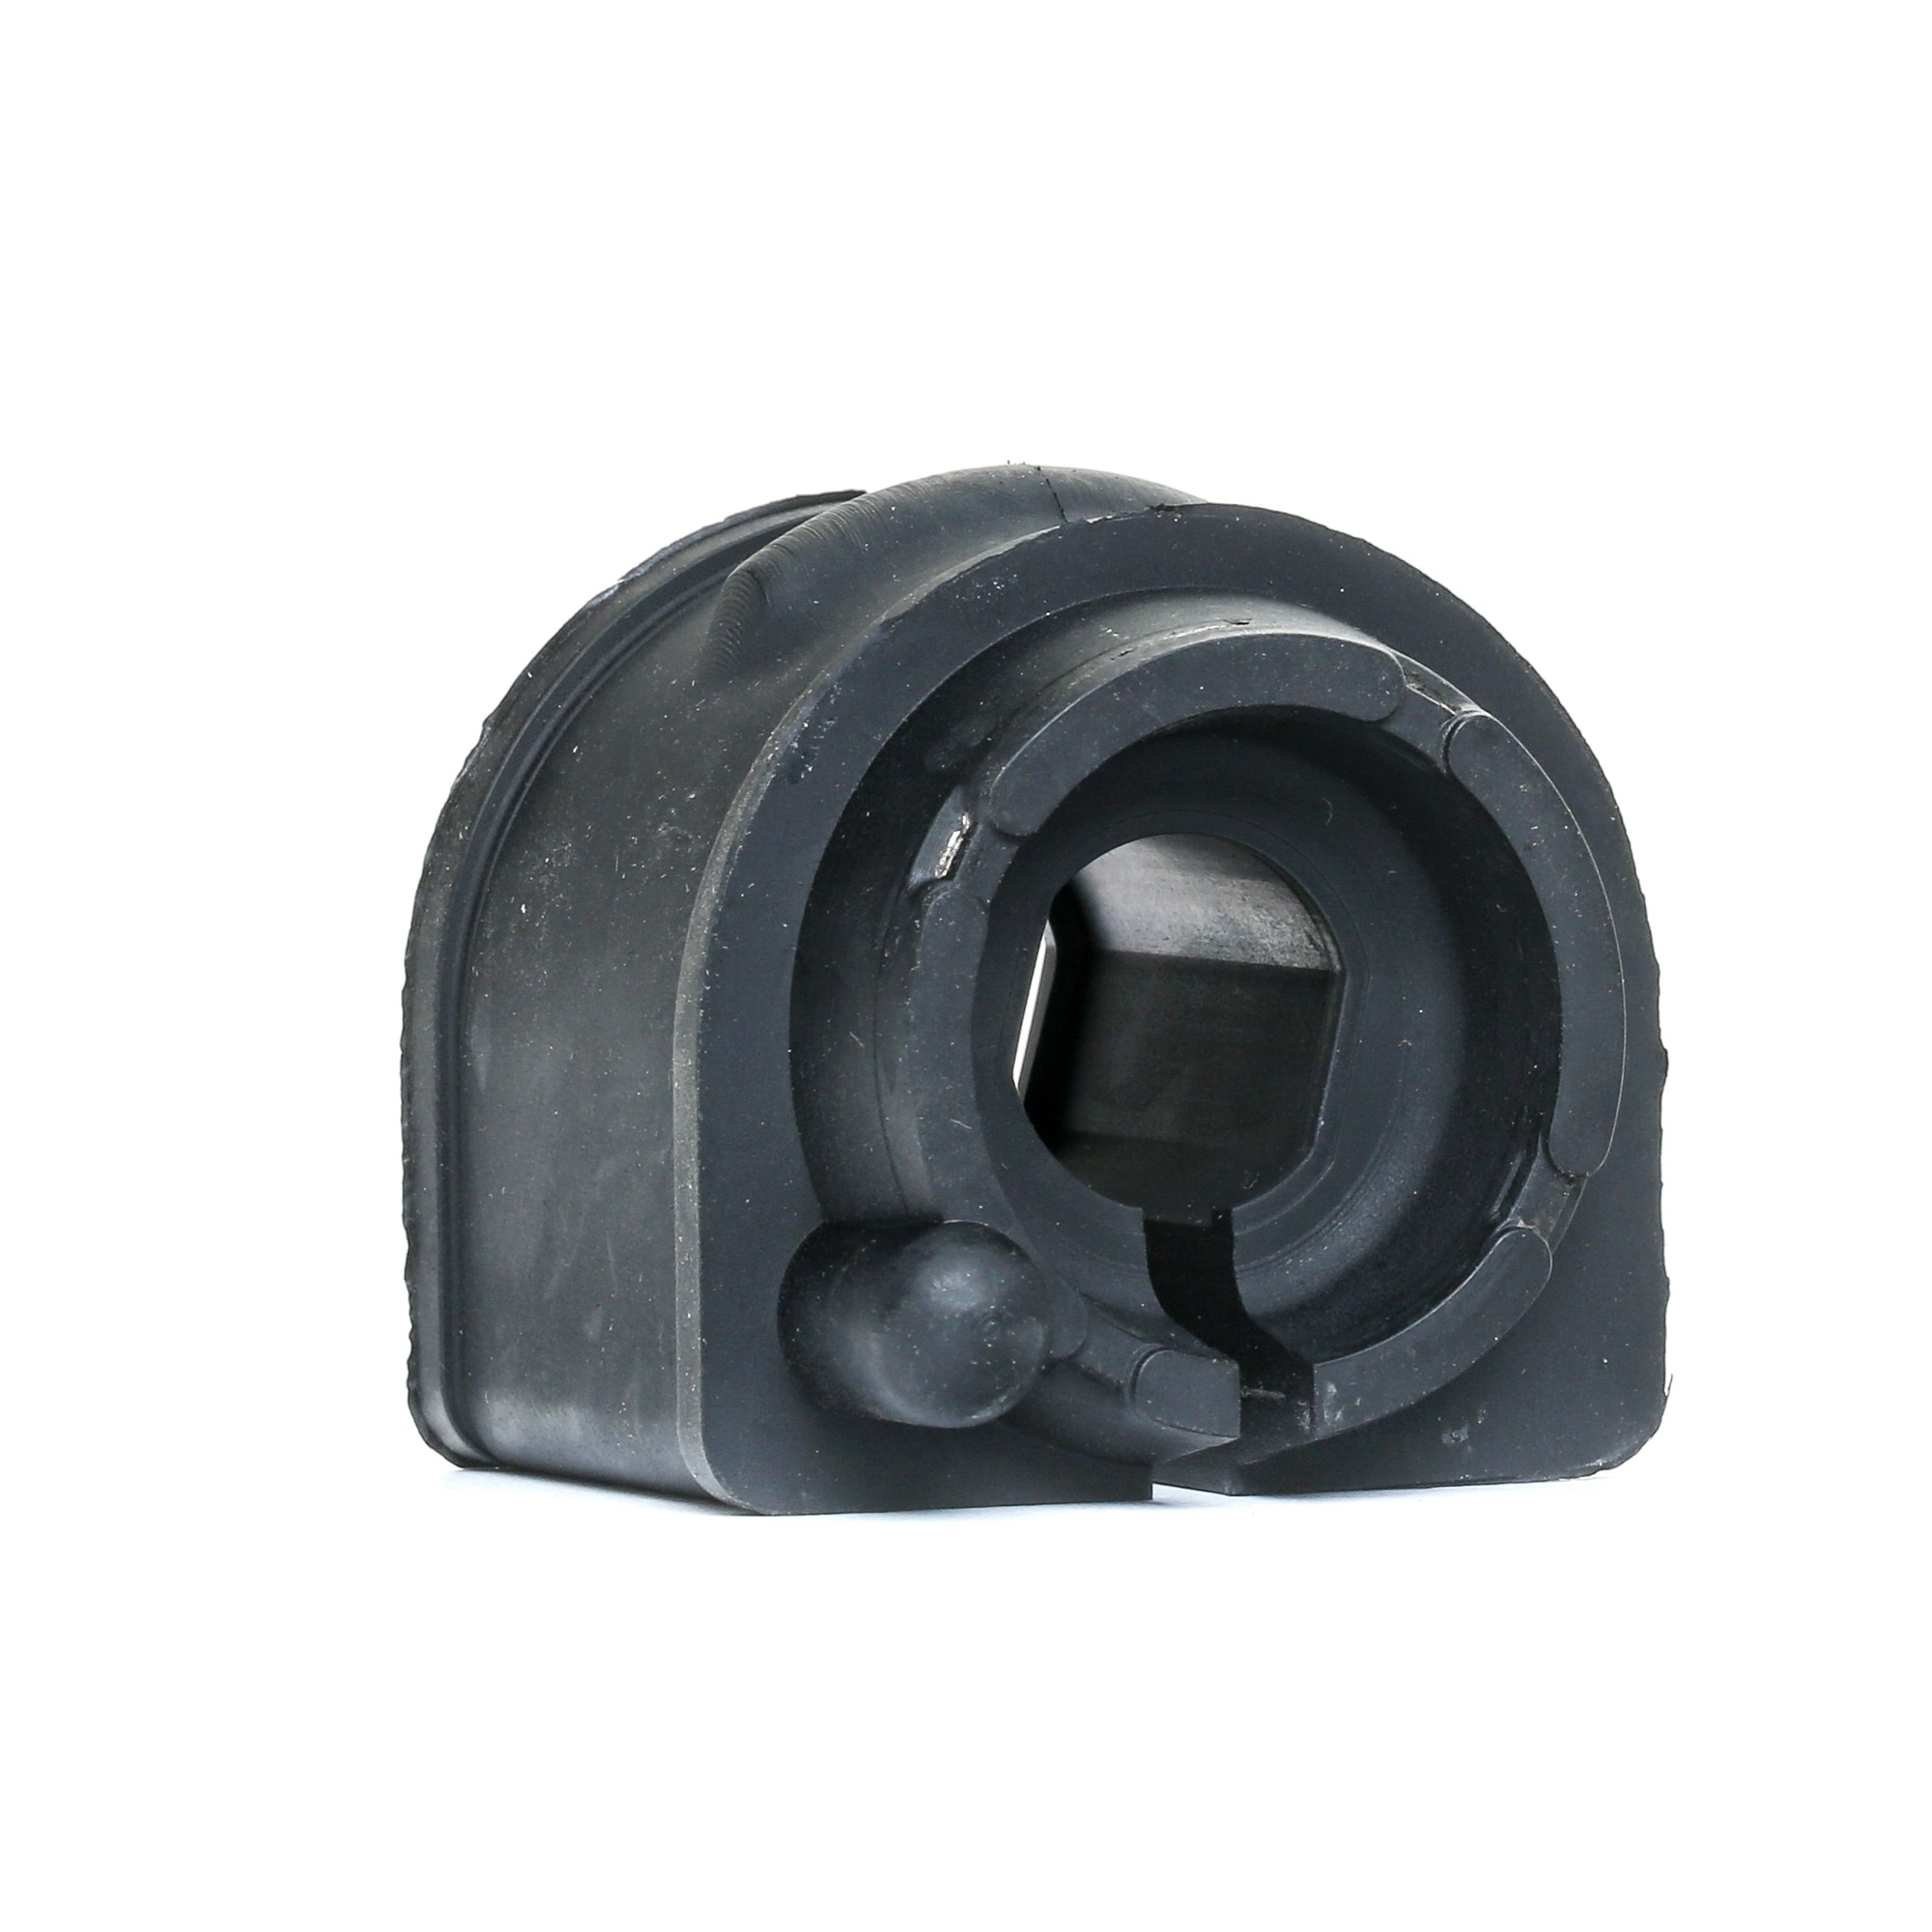 SKABB-2140225 STARK Stabilizer bushes LAND ROVER Rear Axle both sides, Rubber Mount, 16 mm